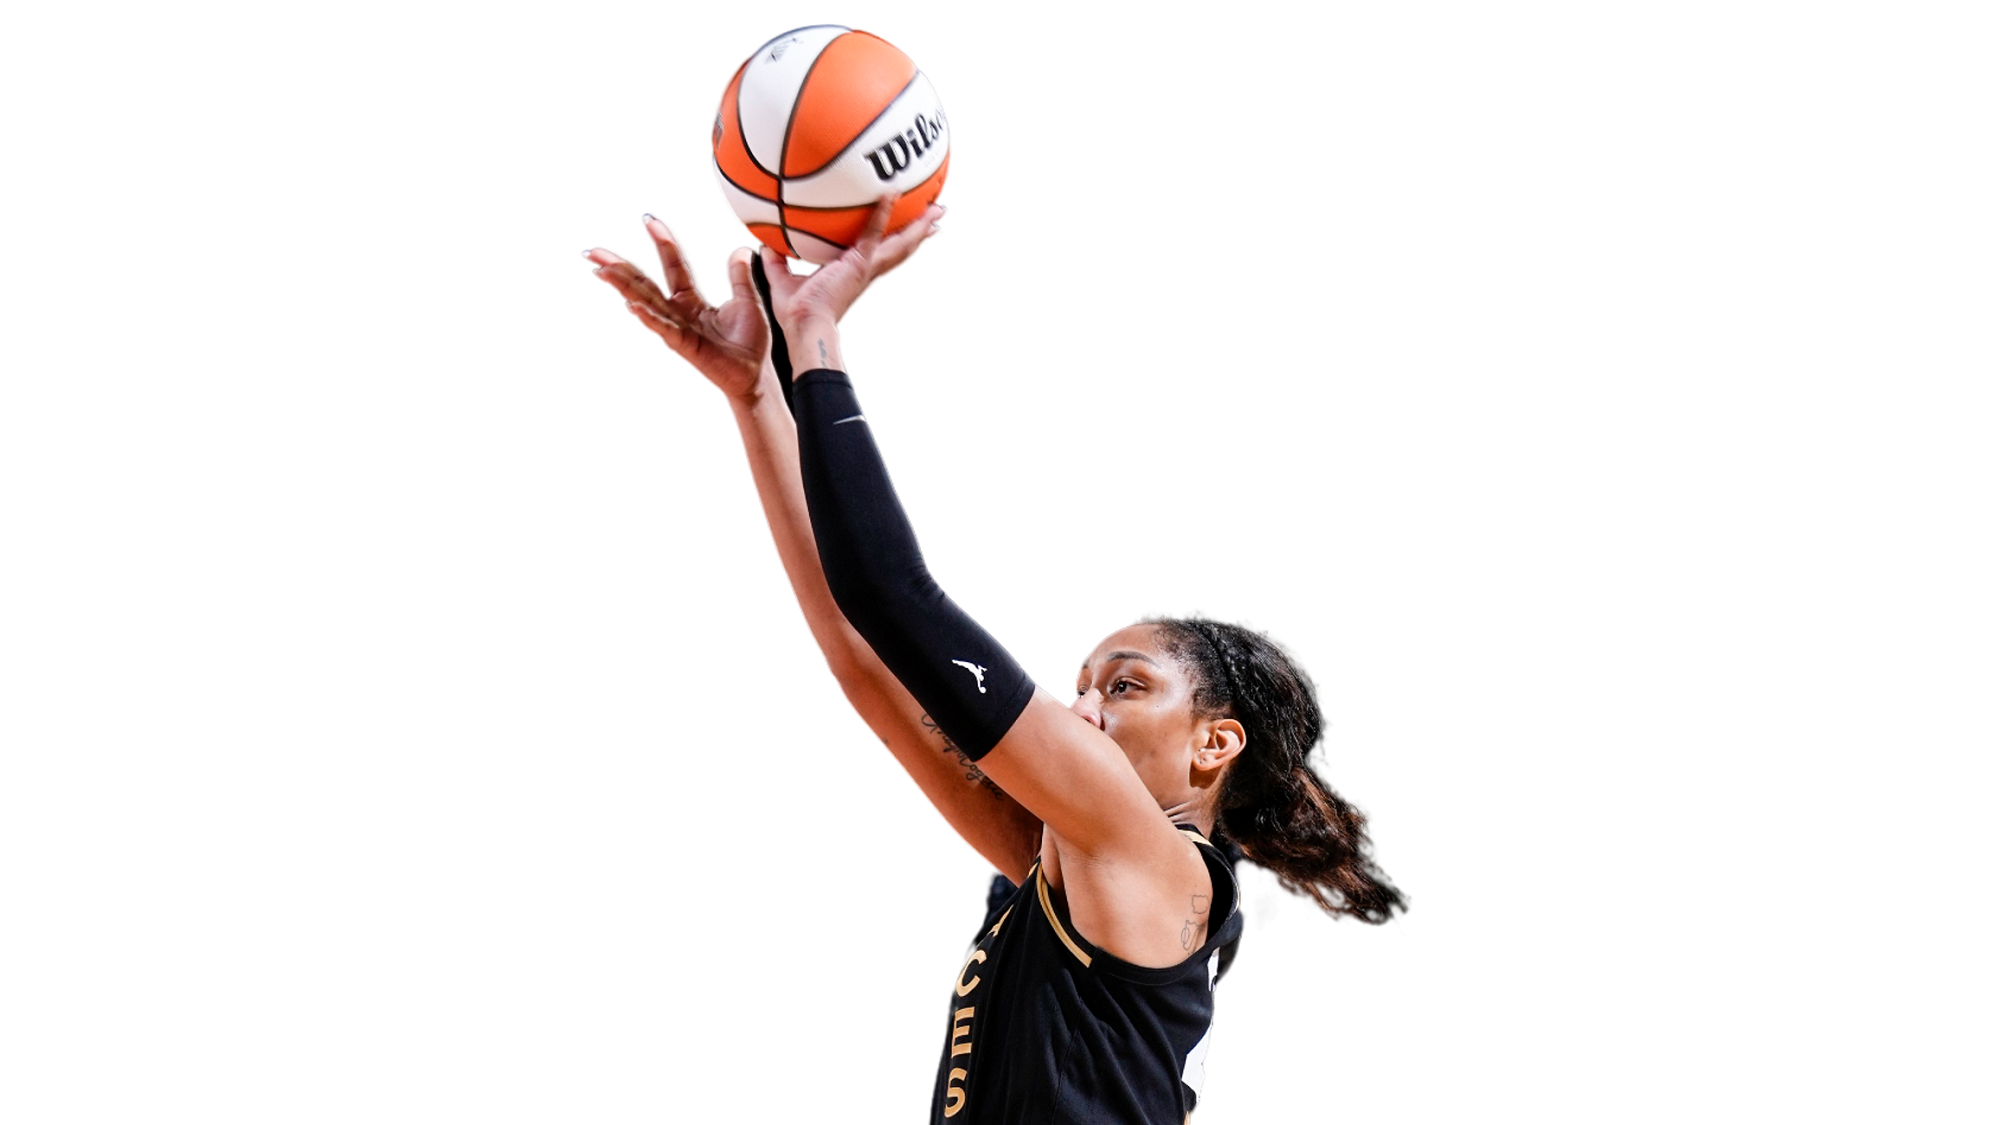 WNBA basketball player, A’ja Wilson is mid-jump with a basketball in her hands. She is portrayed in front of a white background.